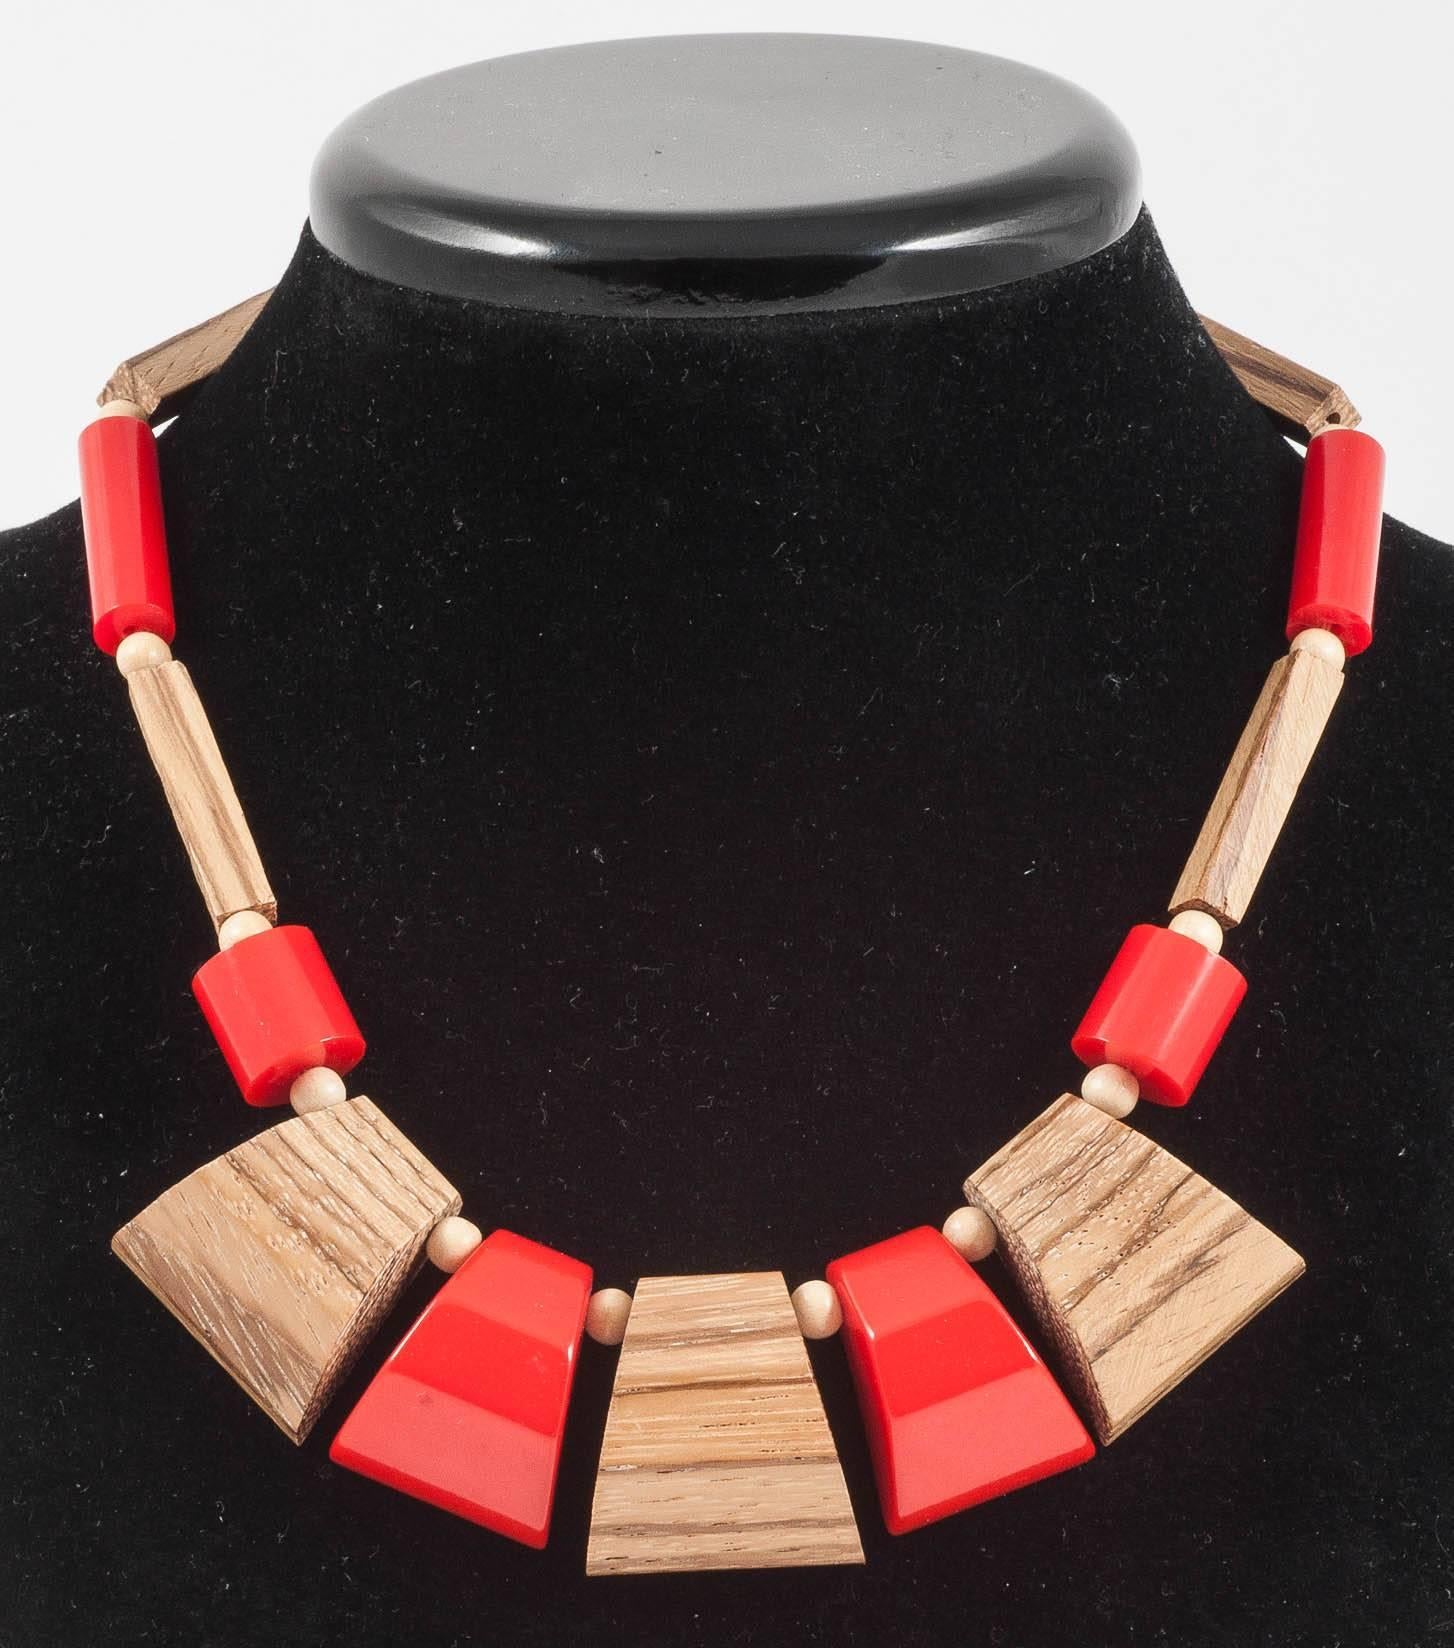 Made from faceted pieces of red Bakelite, and wooden (possibly walnut) sections and  spacer beads,from the 1940s/50s, this is a bright, cheerful and stylish addition to any Summer wardrobe. Sculptural and simple, light and flexible, sitting close to